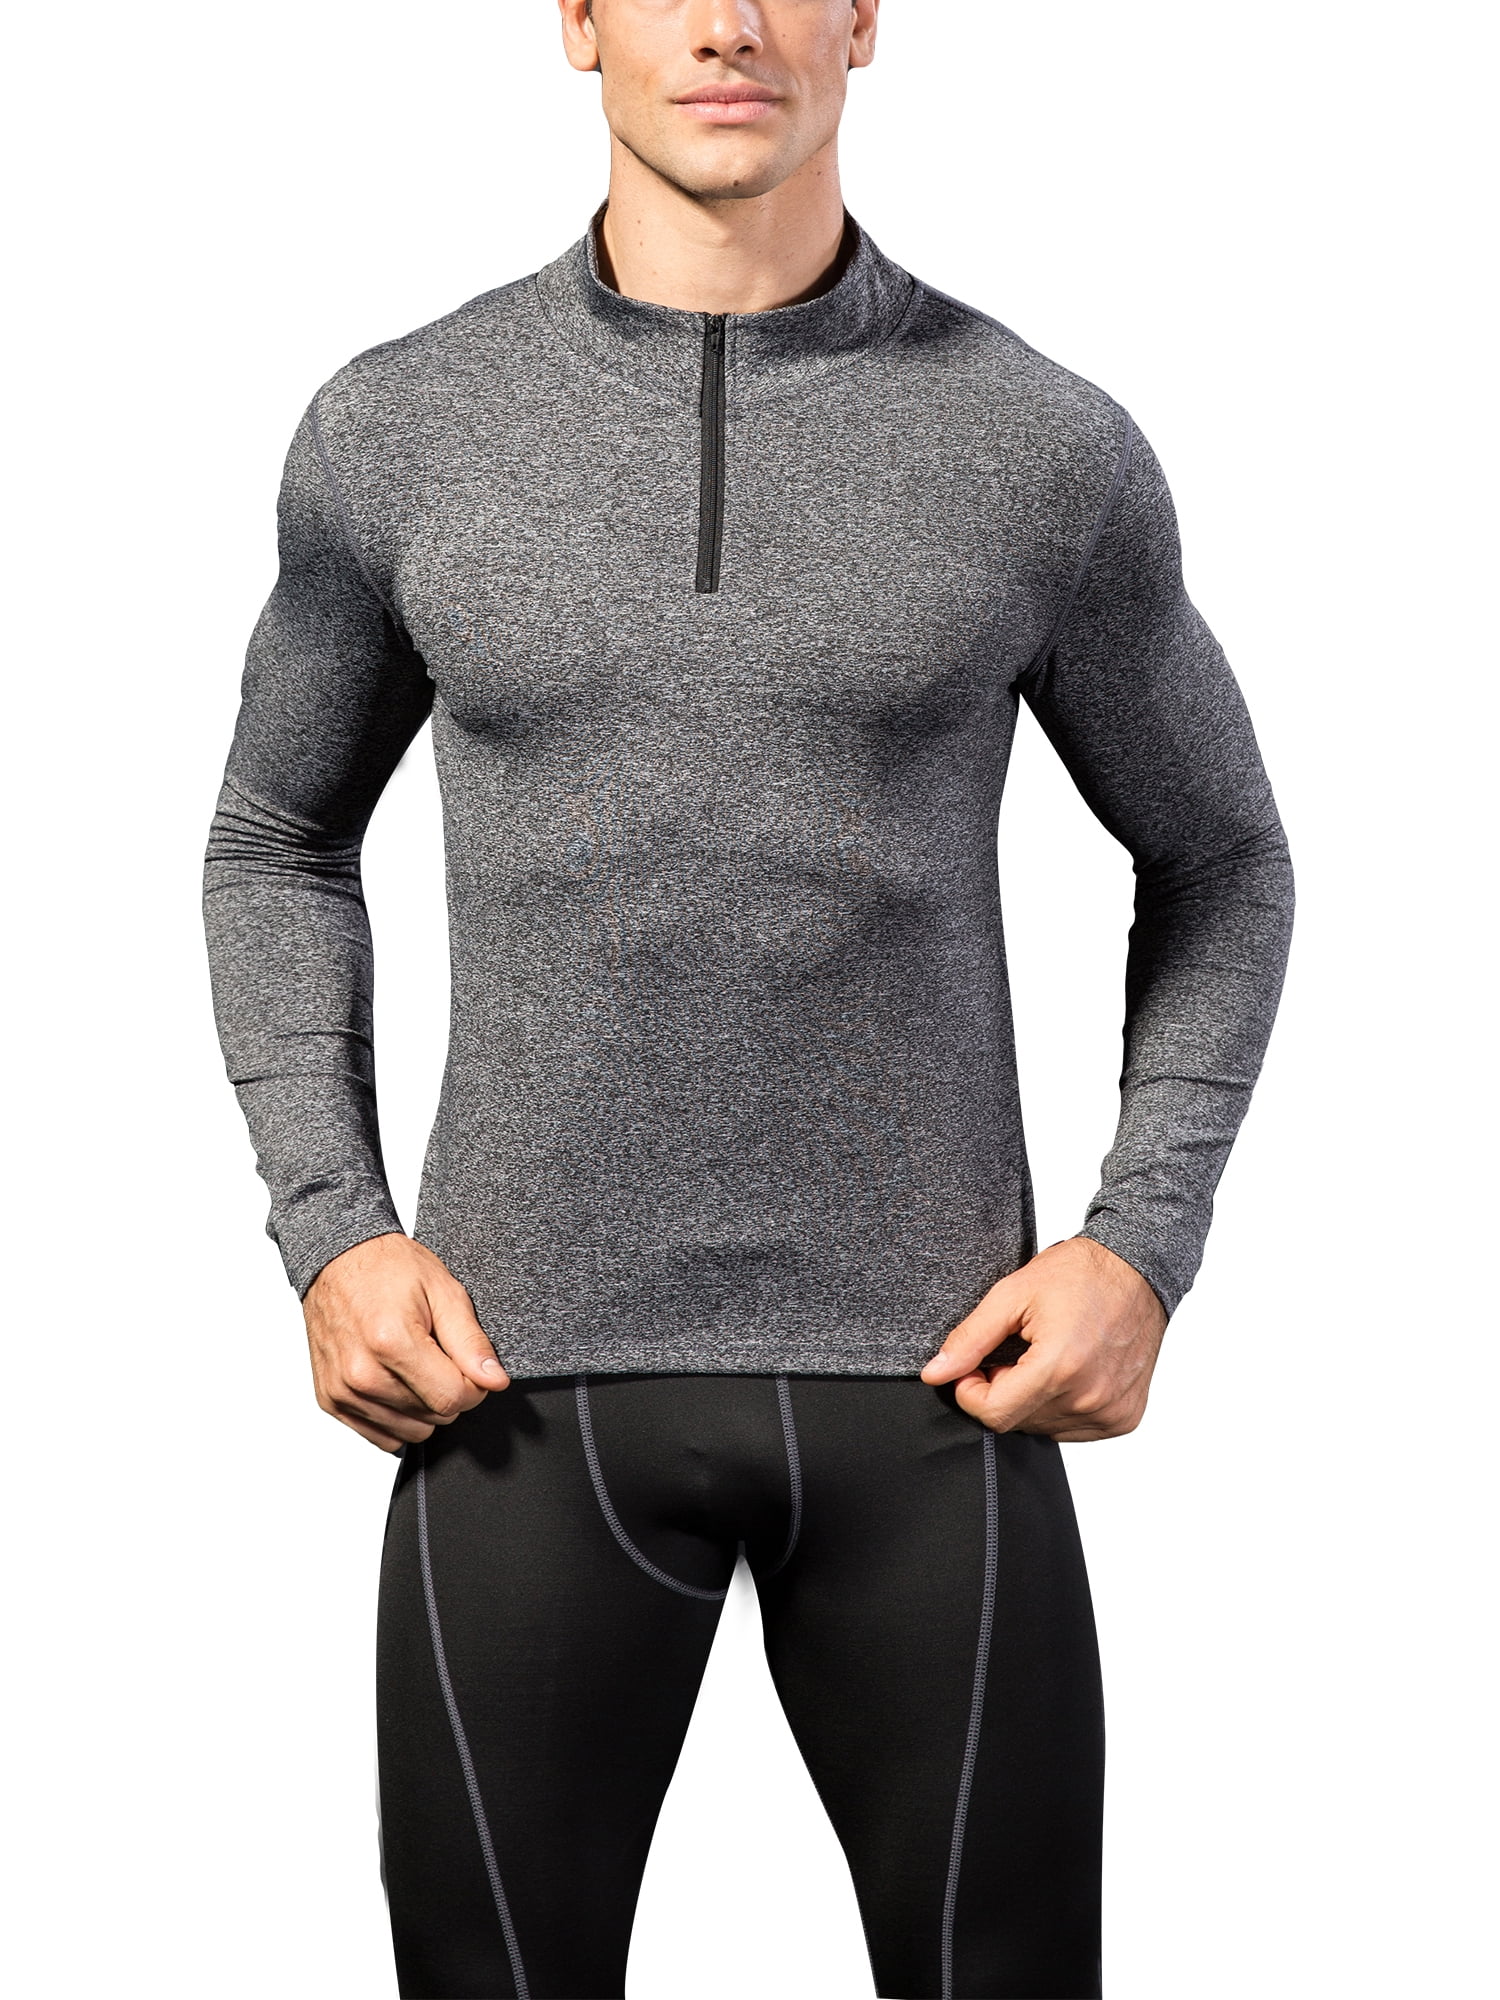 Mens Compression Under Shirt Base Layer Tight Tops Gym Sports T-Shirt Athleisure 